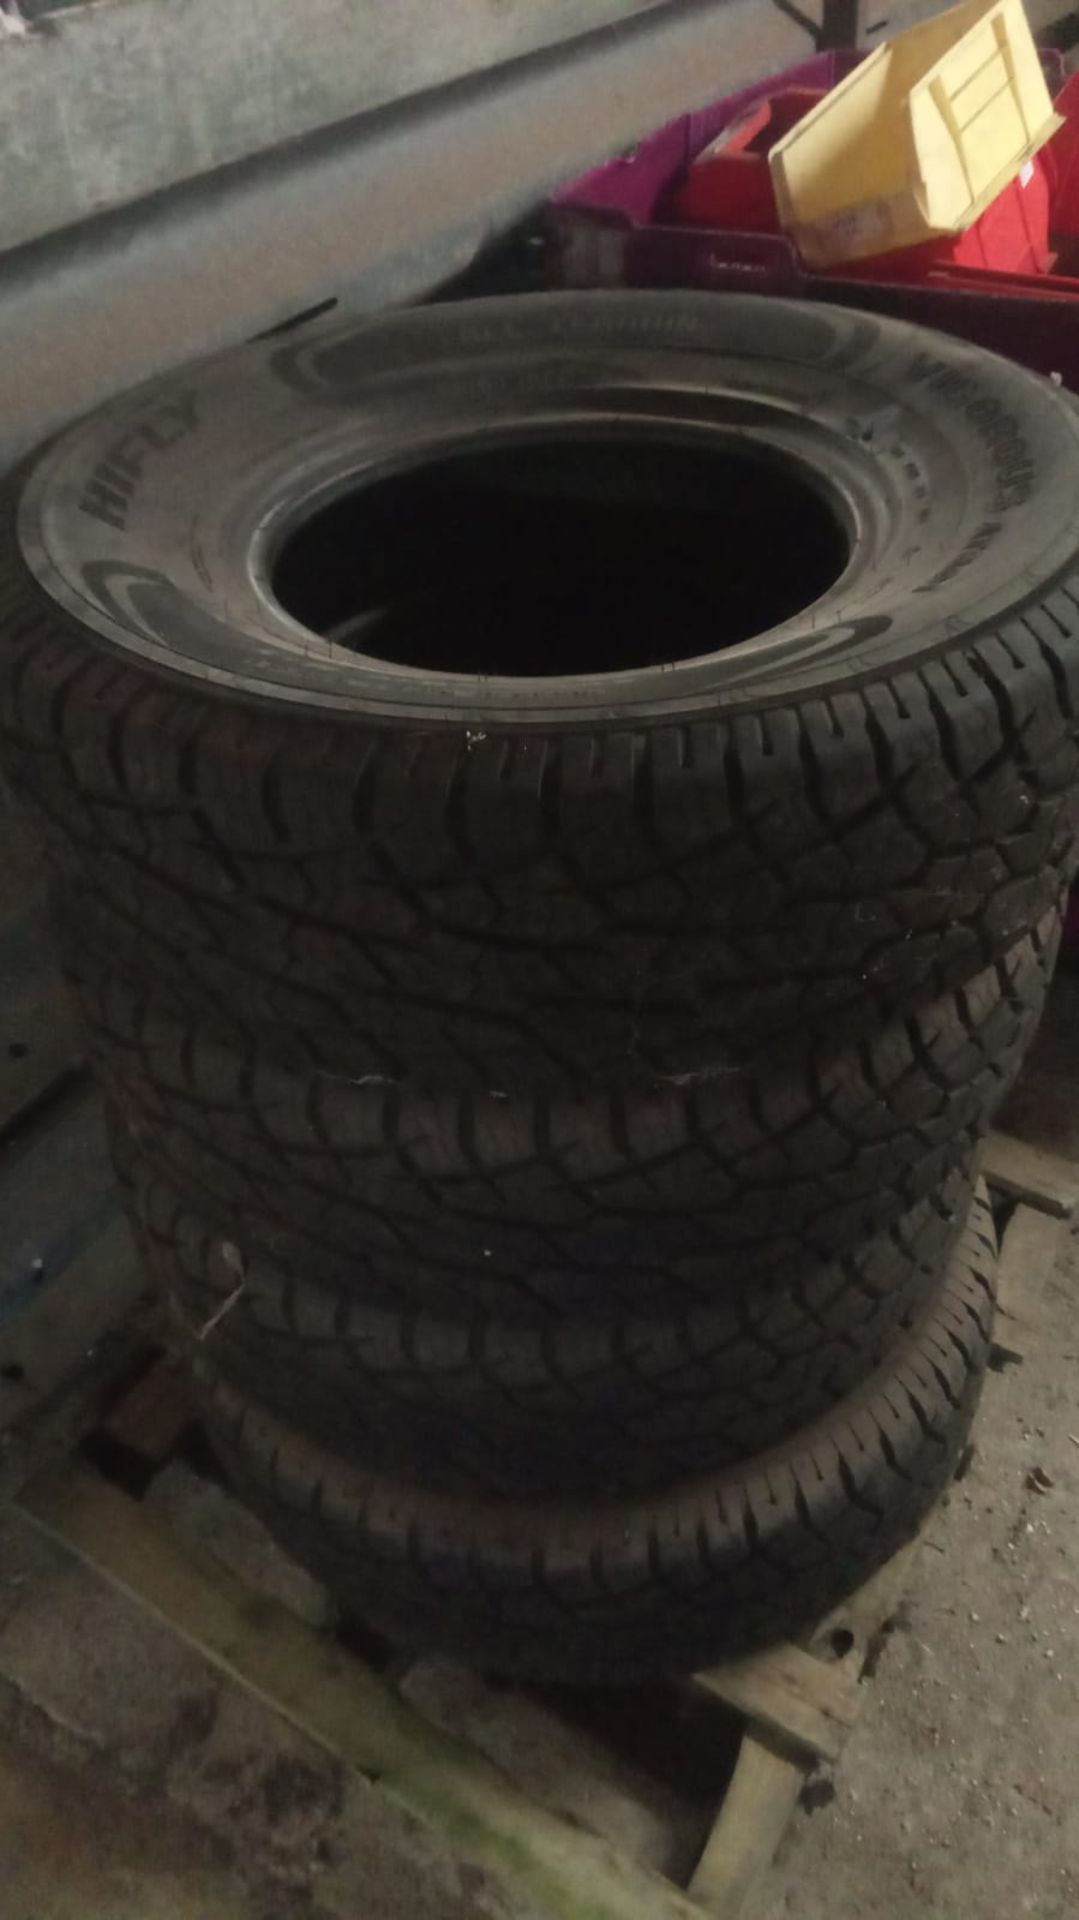 4 Land Rover tyres 265/75/16 - Image 2 of 2